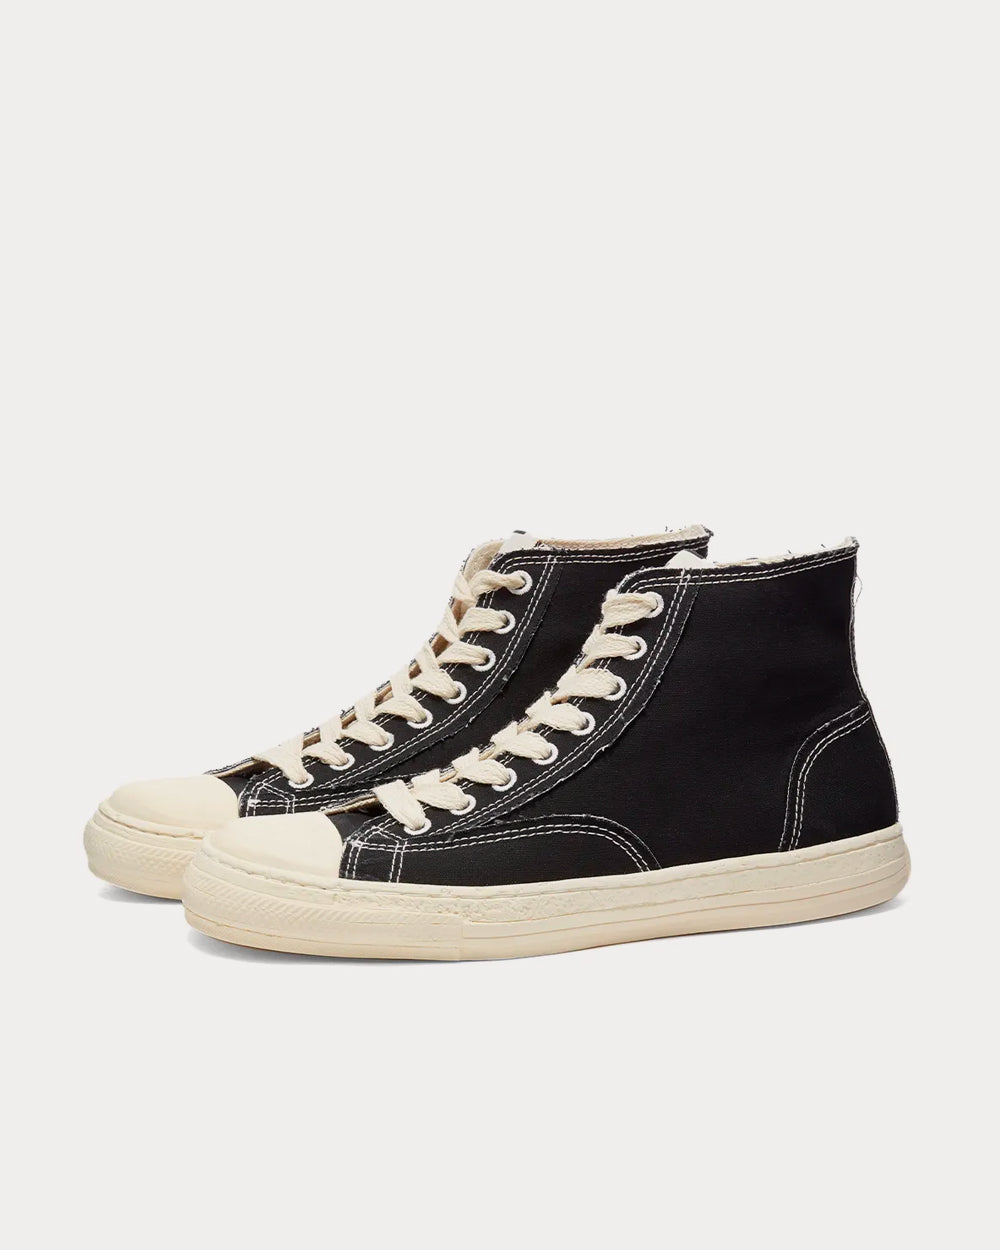 General Scale By Maison Mihara Yasuhiro - Past Sole Black High Top Sneakers